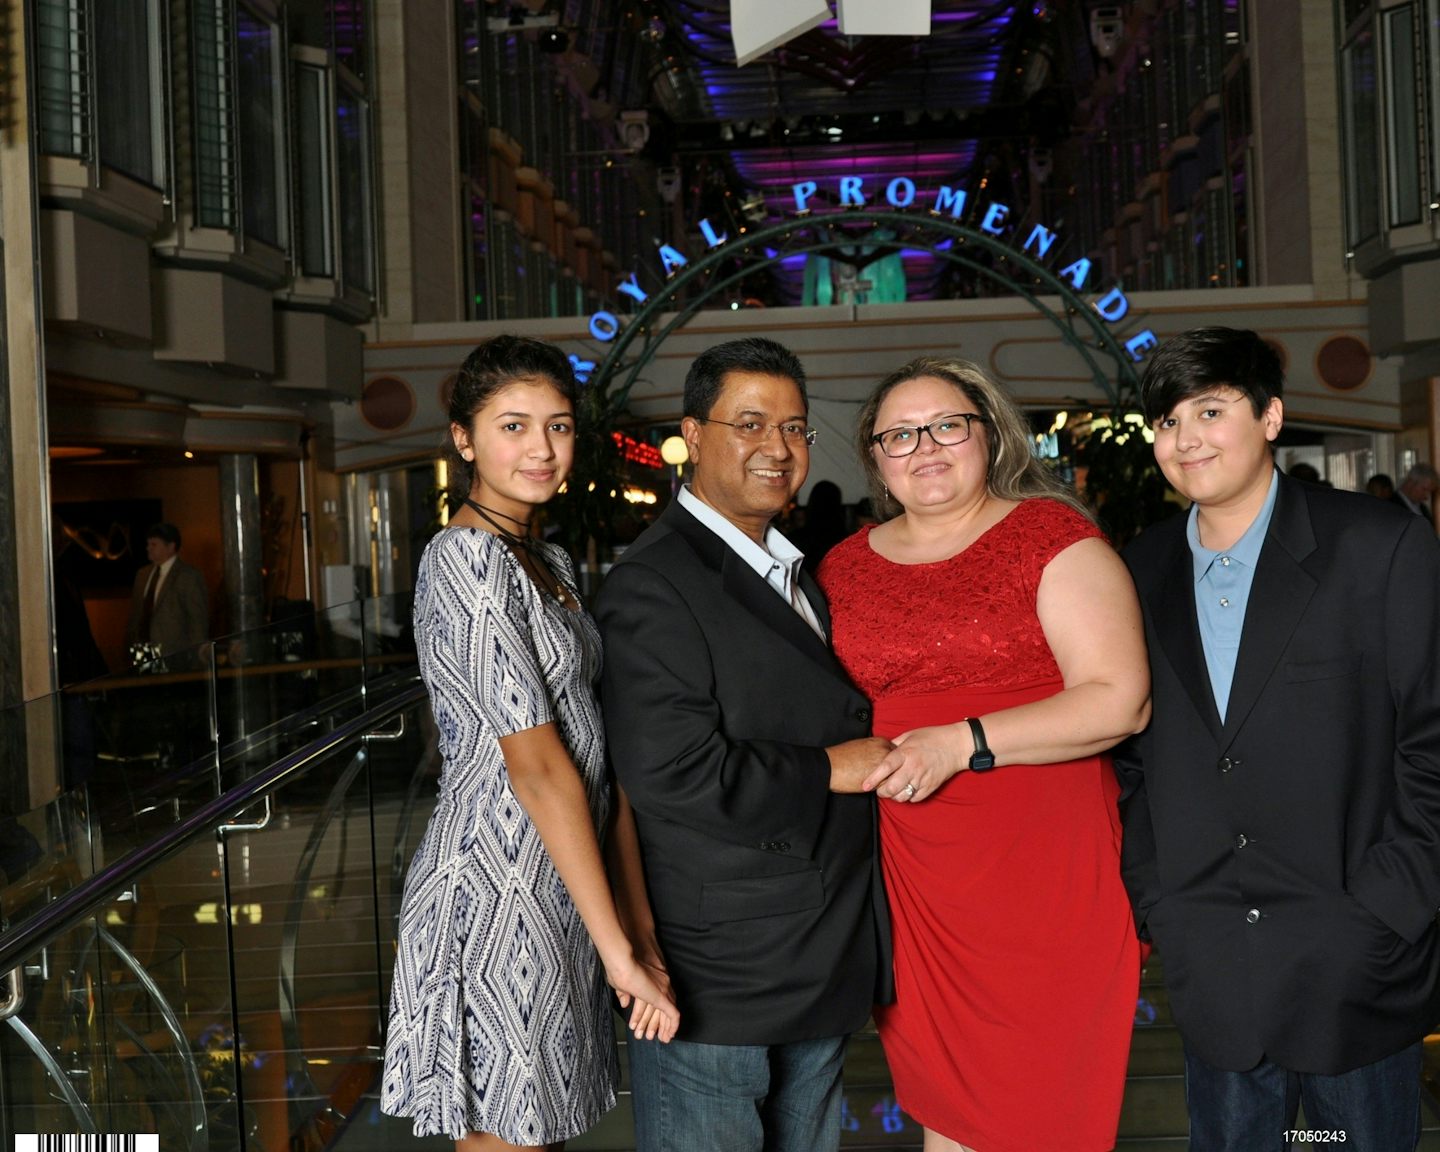 Our family photo on Royal Caribbean's Liberty of the Seas